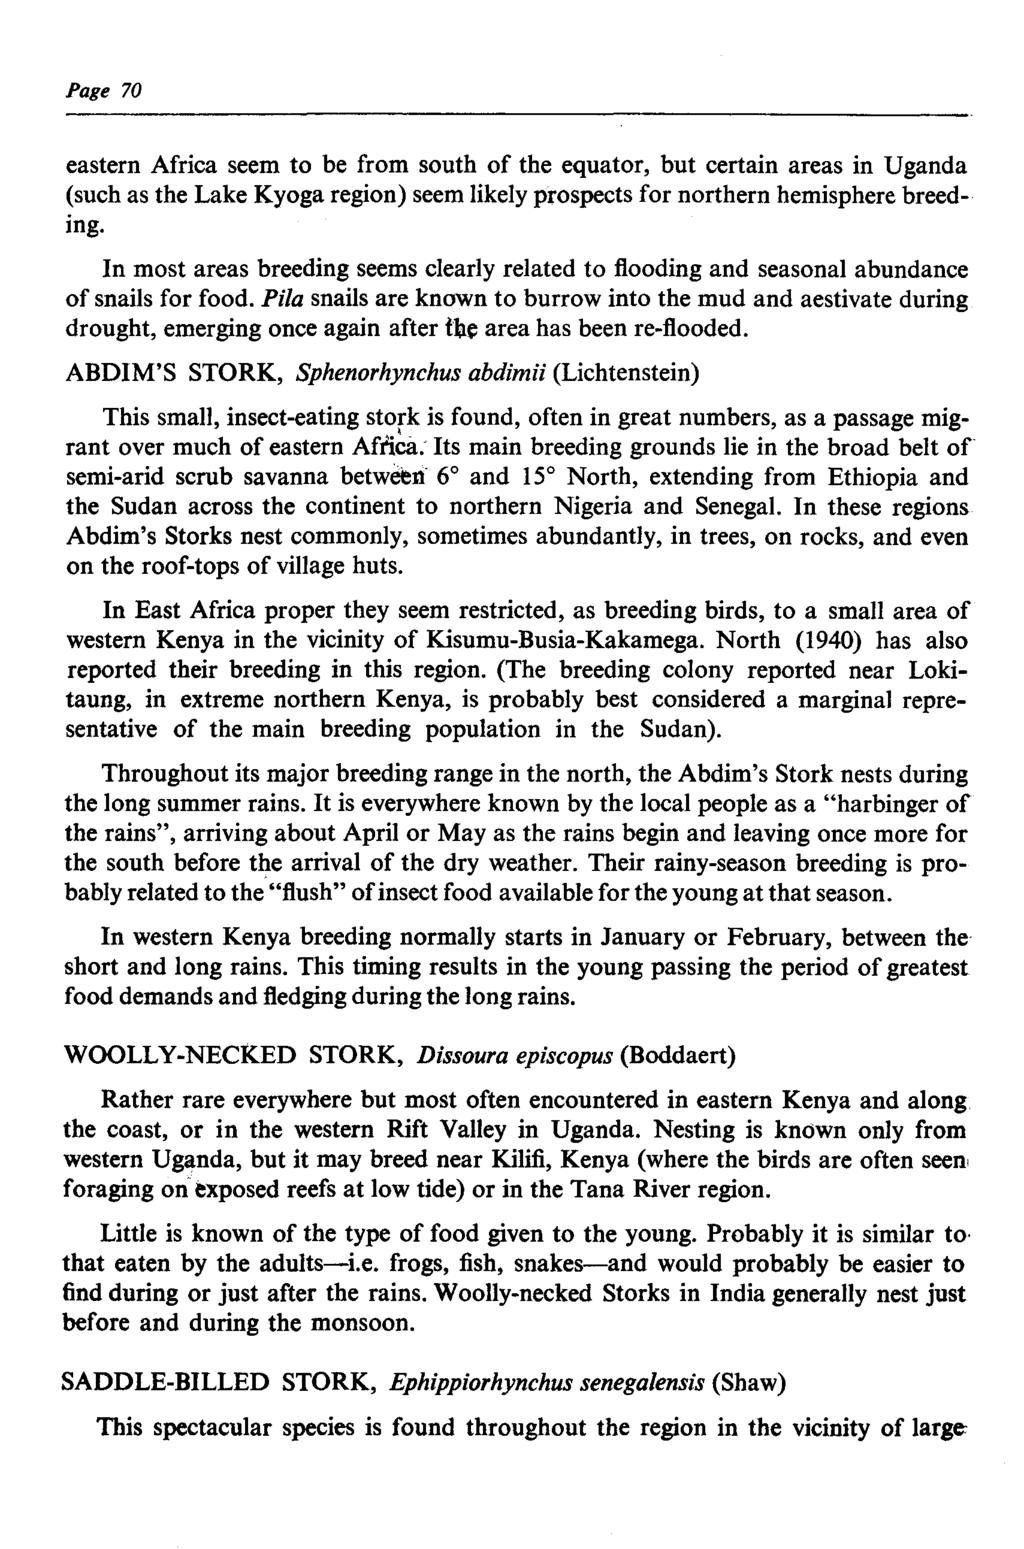 Page 70 eastern Africa seem to be from south of the equator, but certain areas in Uganda (such as the Lake Kyoga region) seem likely Prospects for northern hemisphere breeding.